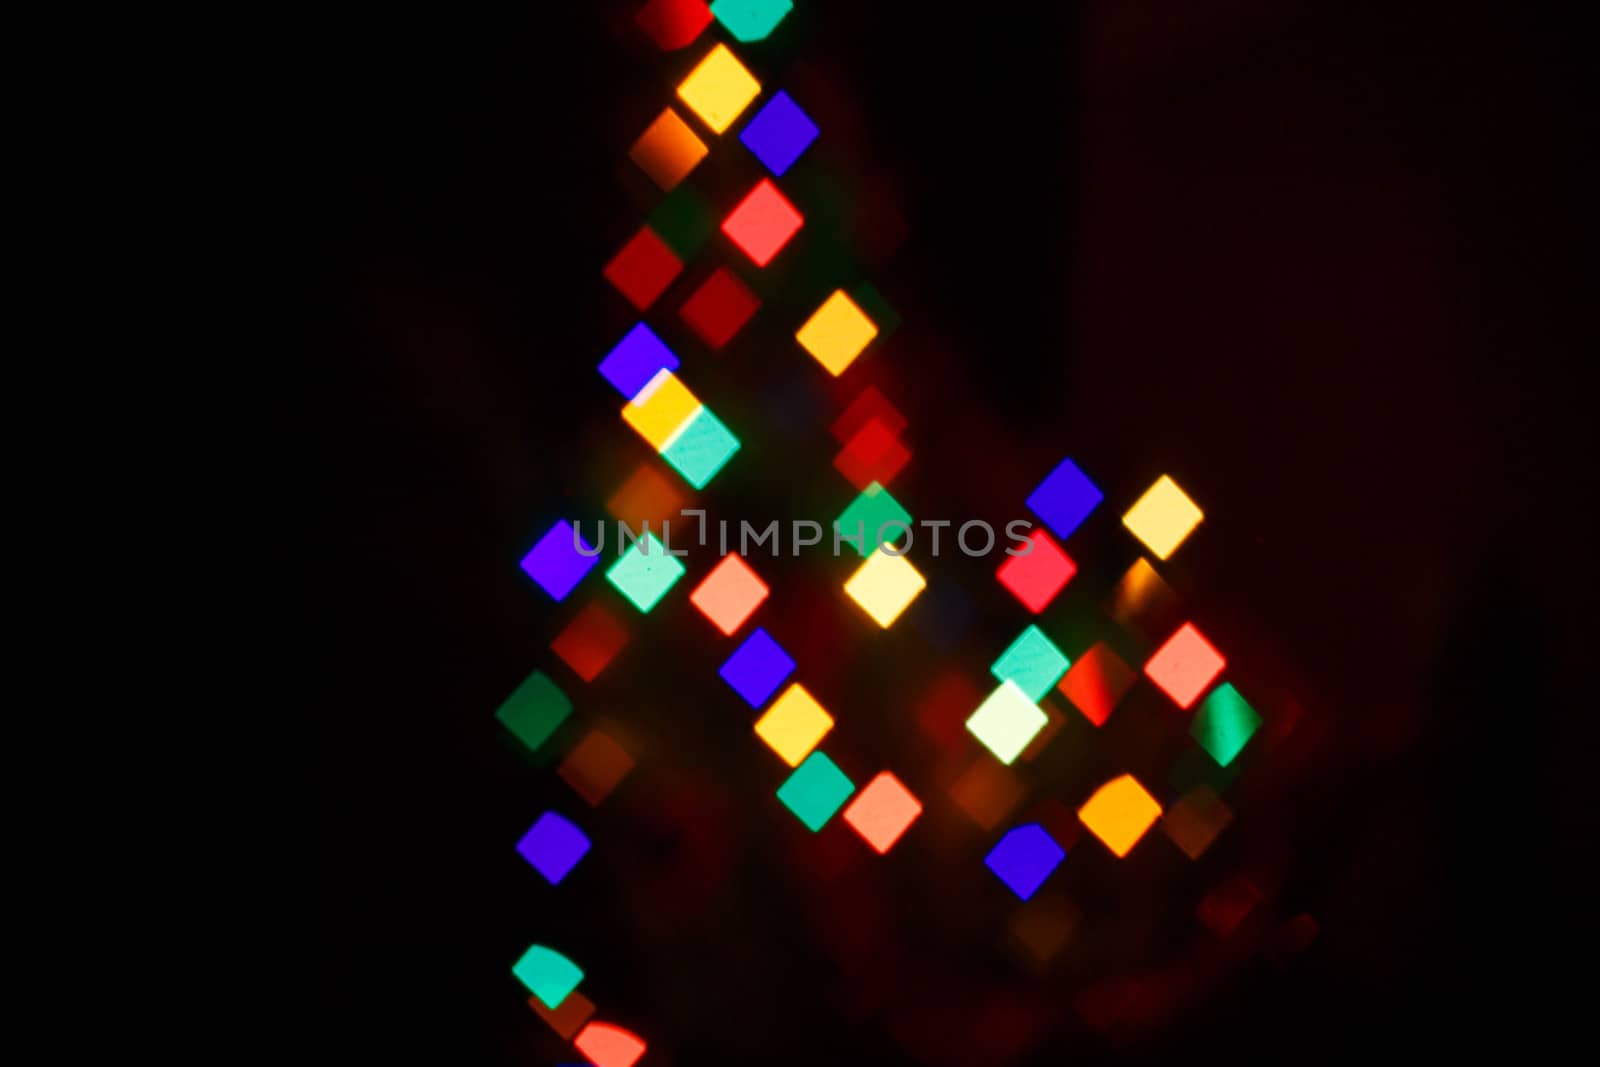 Abstract bokeh background in the form of squares on the night street